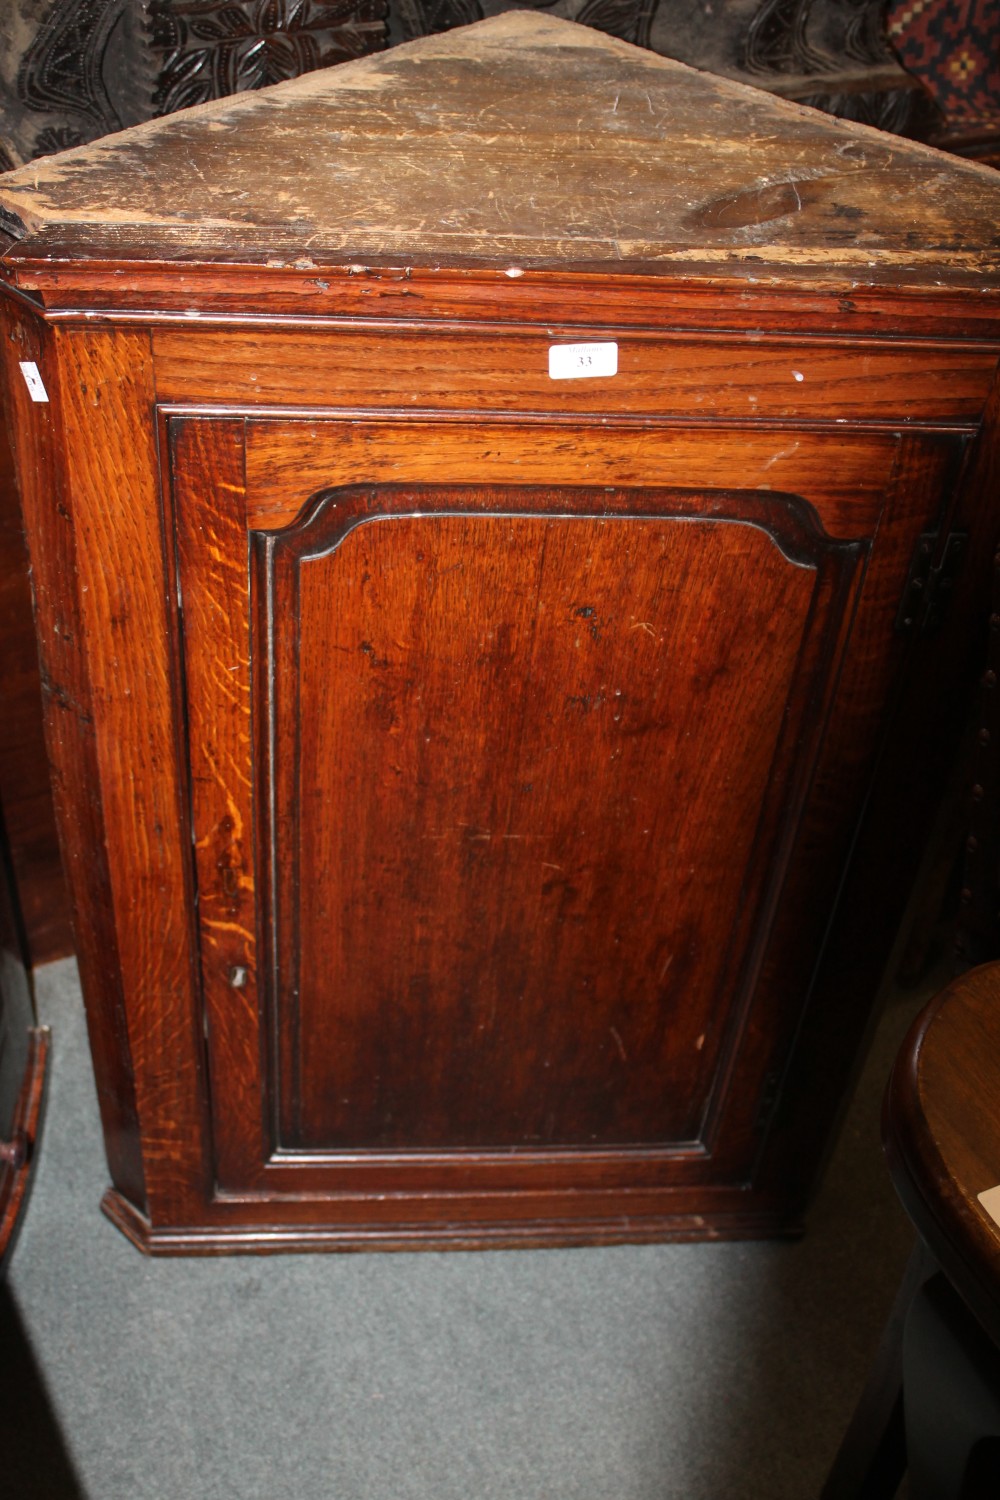 A 19TH CENTURY OAK CORNER CUPBOARD with arch panel door, a Victorian wall cupboard and a glazed